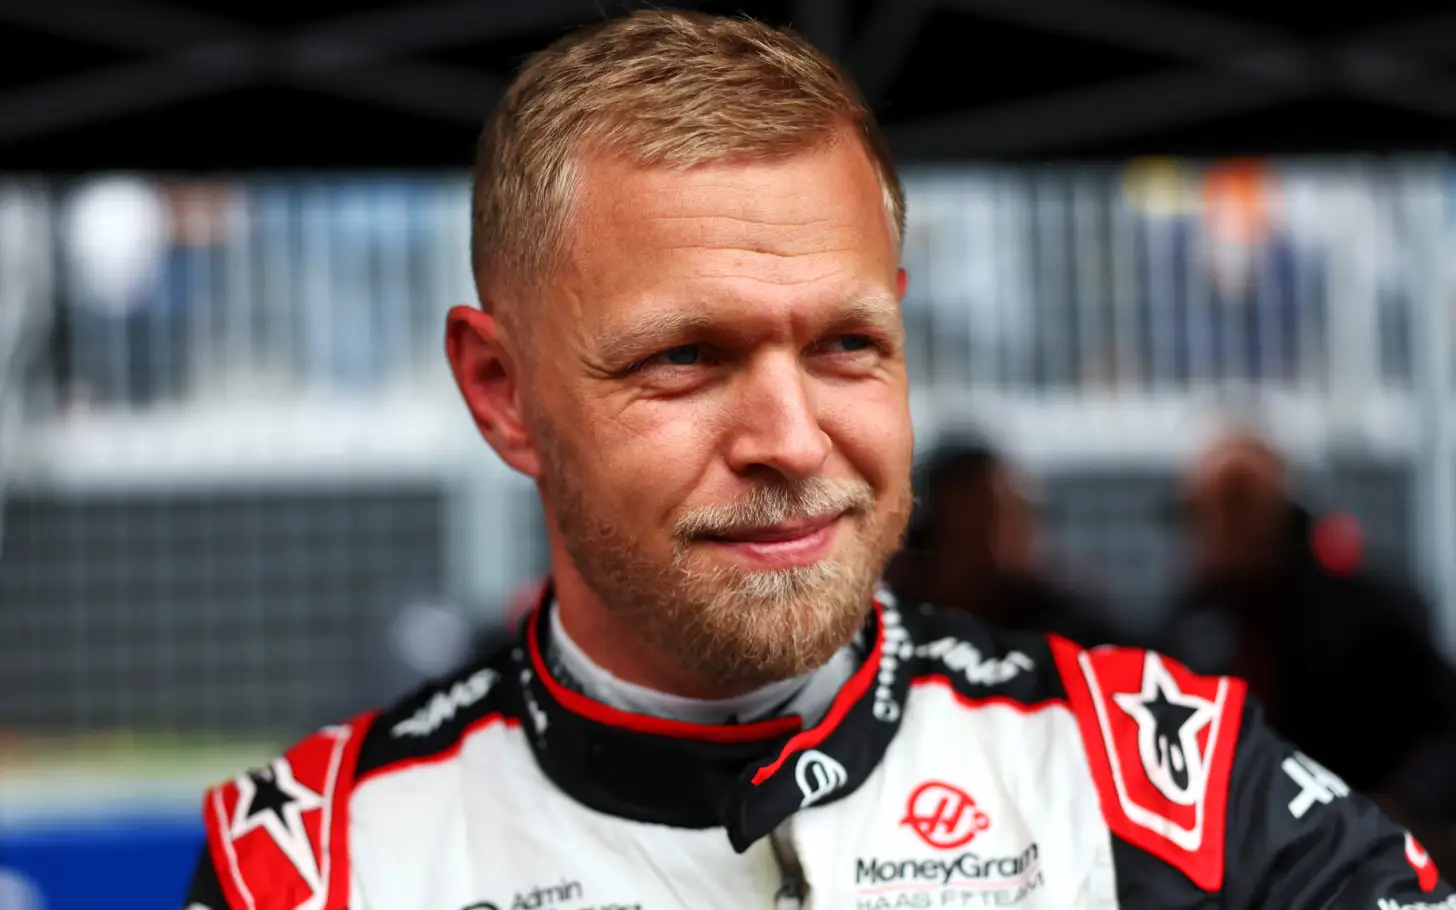 Sad News: Magnussen makes case for Haas contract extension due to…